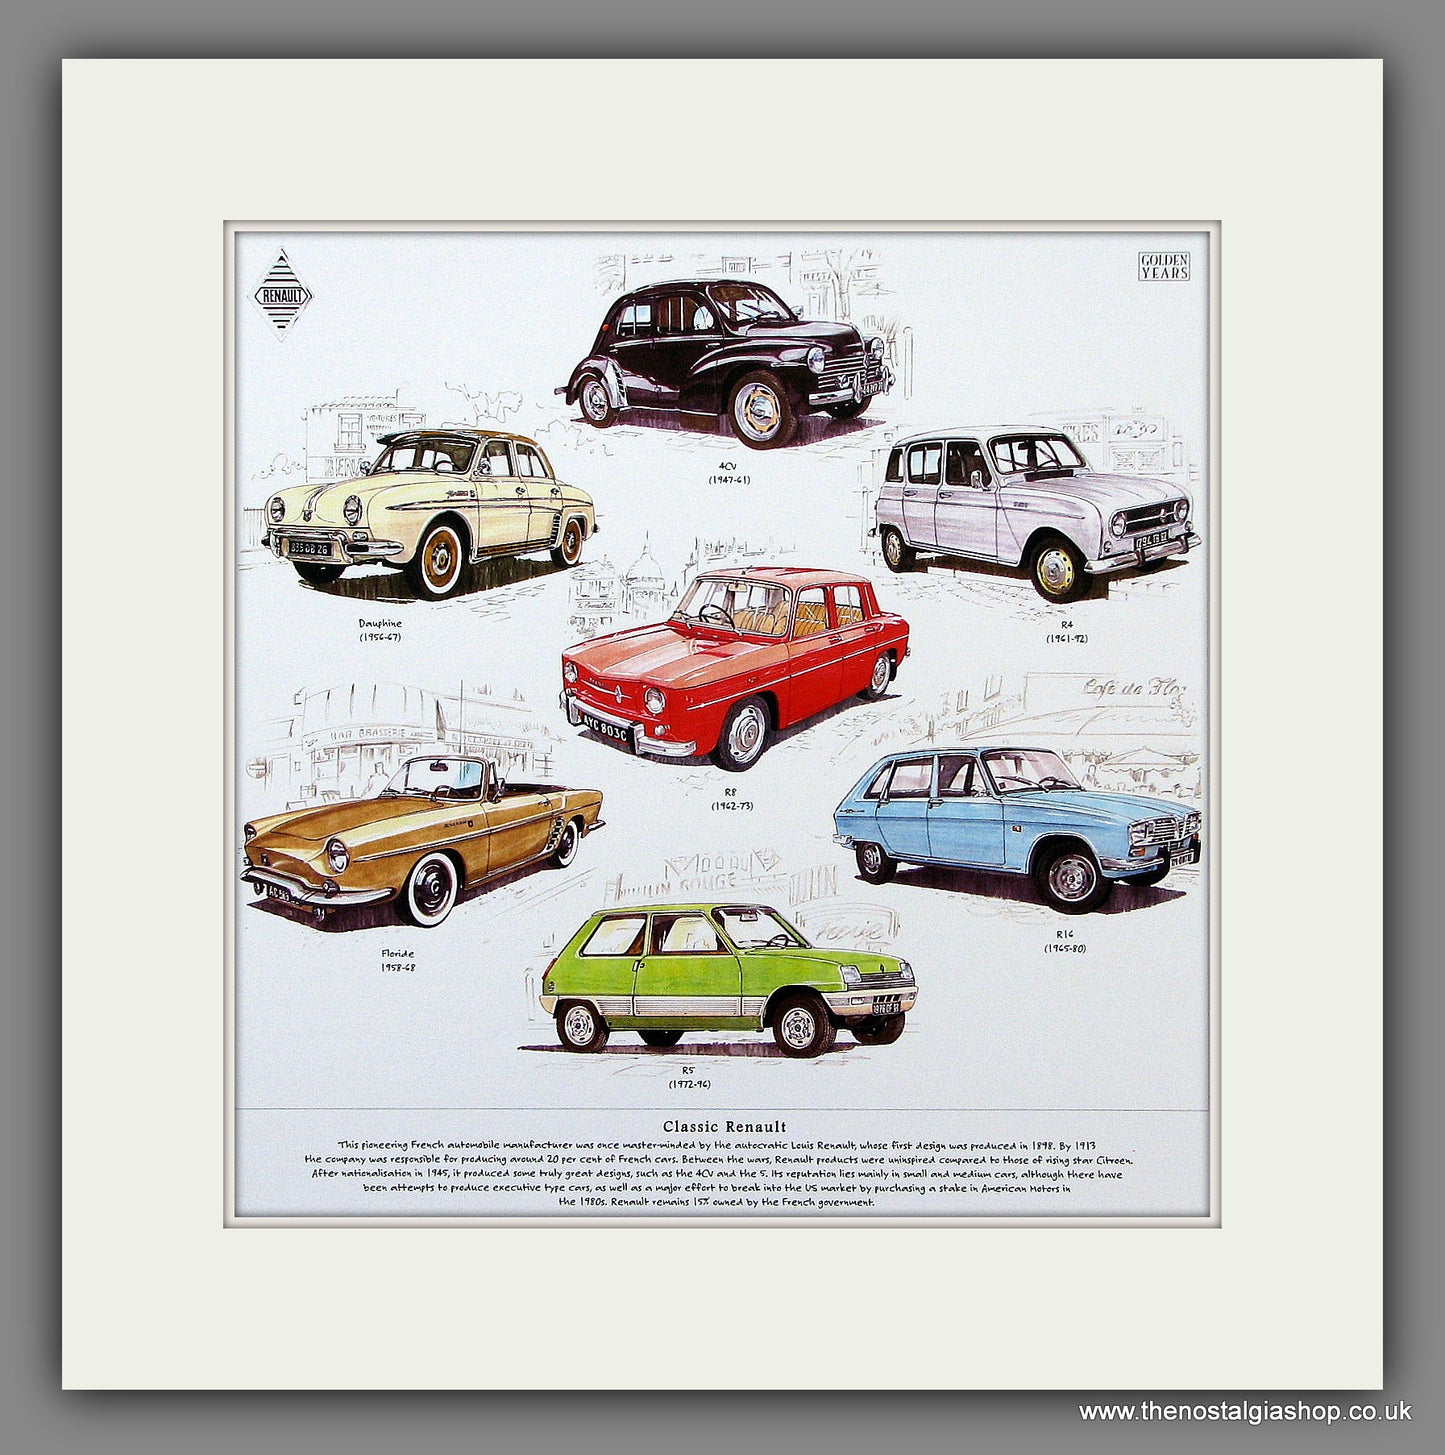 Renault. Classic Cars, Mounted Print.